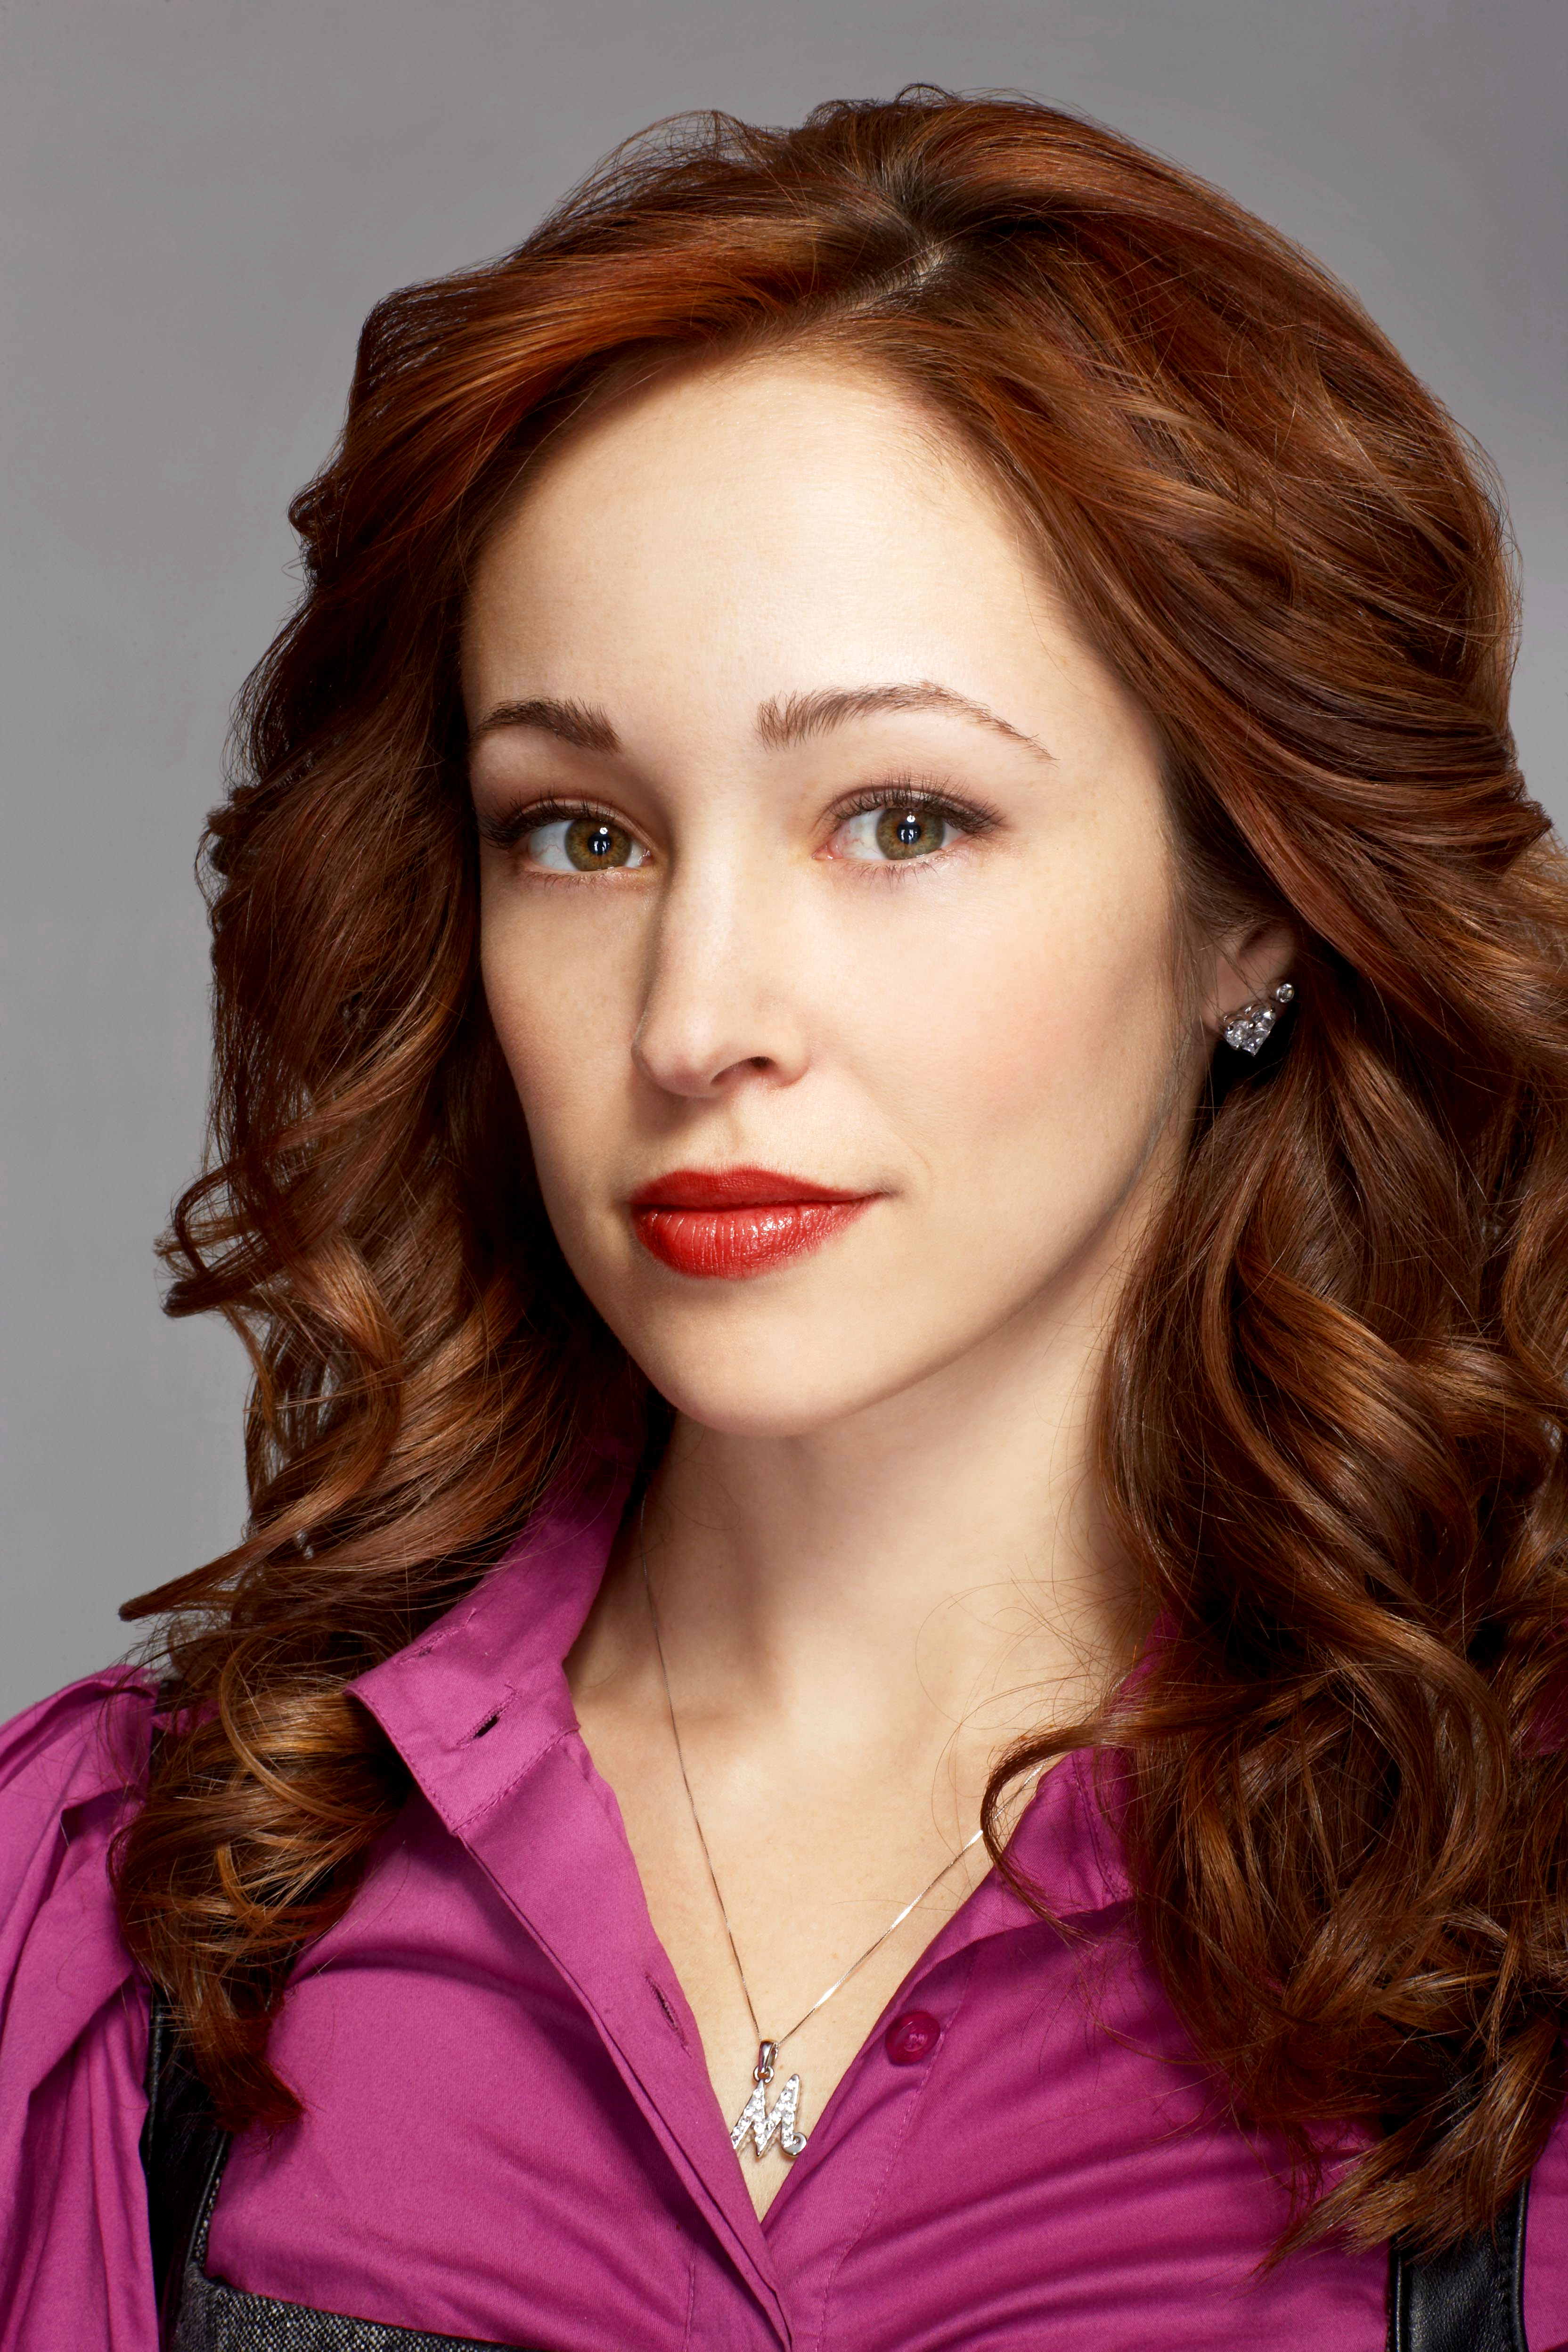 Autumn Reeser stars as Madison in The American Mall (2008)